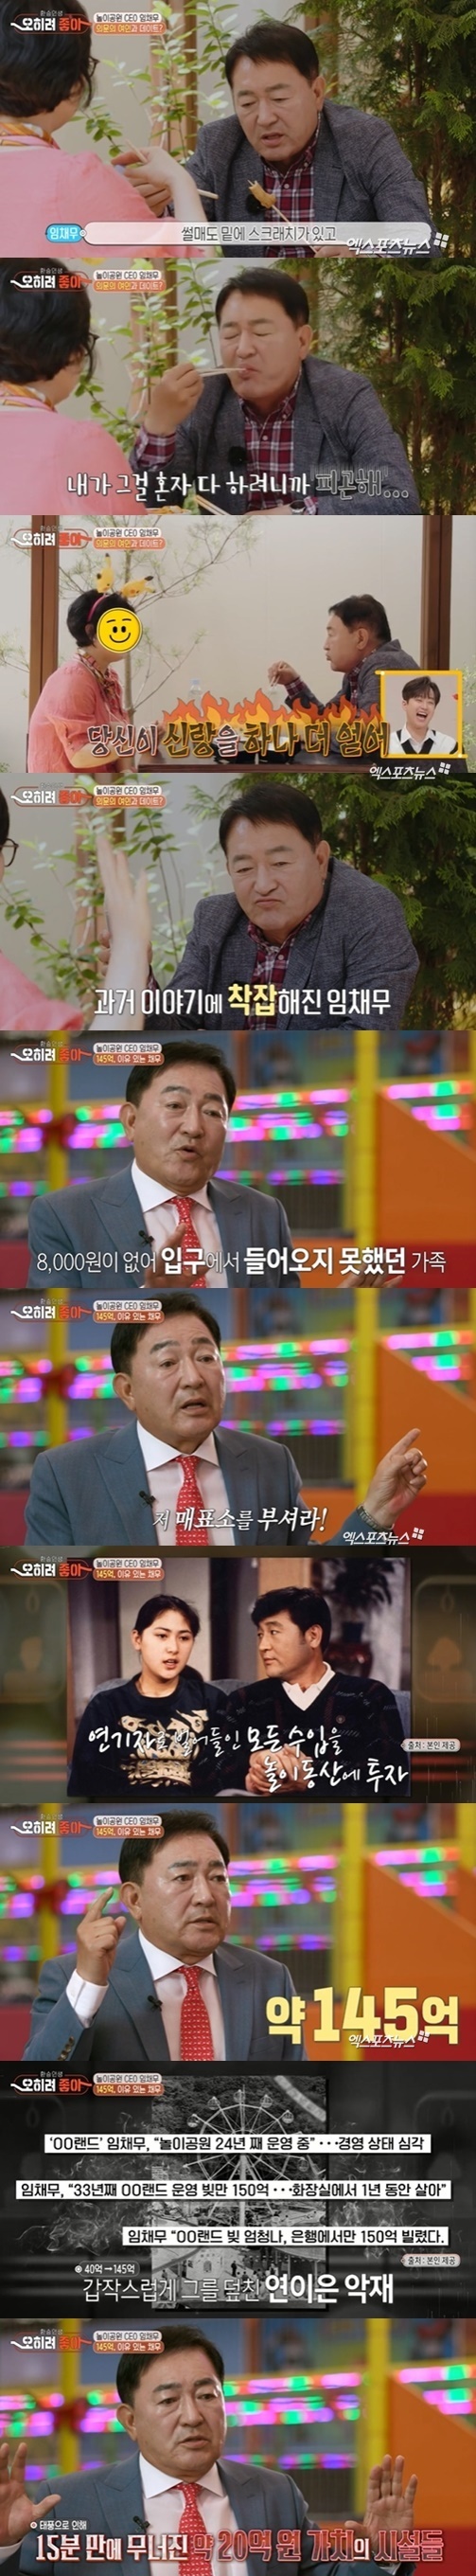 Transfer life, rather good im Chae-mu recalled the difficult memories of running an amusement park.MBC new pilot program Transfer Life, rather good broadcasted on the 17th appeared as Actor im Chae-mu, who runs an amusement park for children.I am a representative of the amusement park; I have 50 years of Actor career and have been running the amusement park for 33 years, said im Chae-mu.Im Chae-mu worked unstoppable before opening at the age of 74 as our age.After work, im Chae-mu managed the body temperature meter, installed a doorway guard line, and checked the ticket office kiosk, table and rides.Im Chae-mu told the production crew: It opened on May 1, 1889; people came in enormously; I got 2,000 won for admission.A week after the opening, a family member could not come in because there was no 8,000 won. He called the executive to break the ticket office.I first bought the land in 1989 and got a loan when I opened it in 90, and I still pay interest to 4 billion people who borrowed it.The remaining World Bank debt is about 14.5 billion won, and when the typhoon and rainy season came, the bank was overflowing and the 2 billion-won facility was swept down in 15 minutes.I could not make money because the IMF came to me afterwards. Im Chae-mu settled a meal with his wife Kim So-yeon in a pretense.My wife asked, At first, everyone is ruined, when I said I was ruined, when I sat down and drank a beer, was it too good?I dont want to go back to the beautiful things in the past, but I thought about who I was going to go to and ask for money, said im Chae-mu.Did you not fall on the toilet bench? the wife recalled.Im Chae-mu told the production team: Heart Rhythm Society came.He didnt fall, but if he moved a lot, he was breathing fast, so he went to the emergency room.I went to World Bank a few times to get a default. Im can do it. I came here.If you do your best and do not do bad things, someone will help you. Photo: MBC Broadcasting Screen